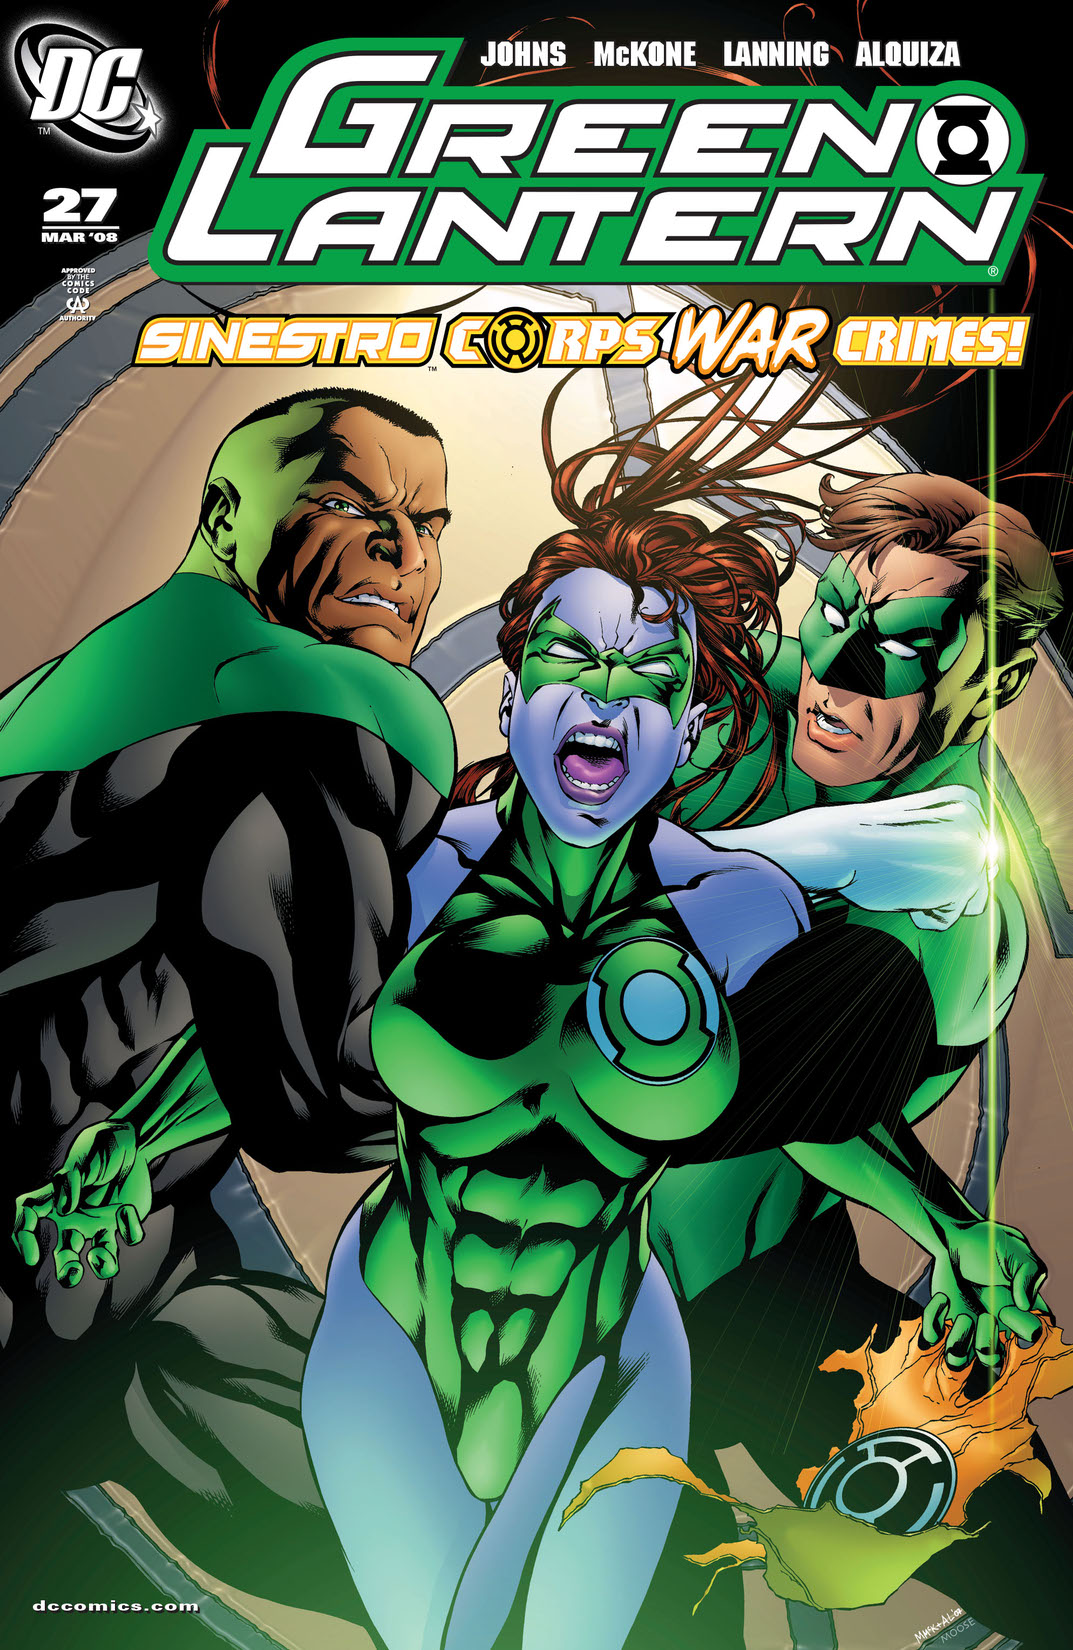 Green Lantern (2005-) #27 preview images